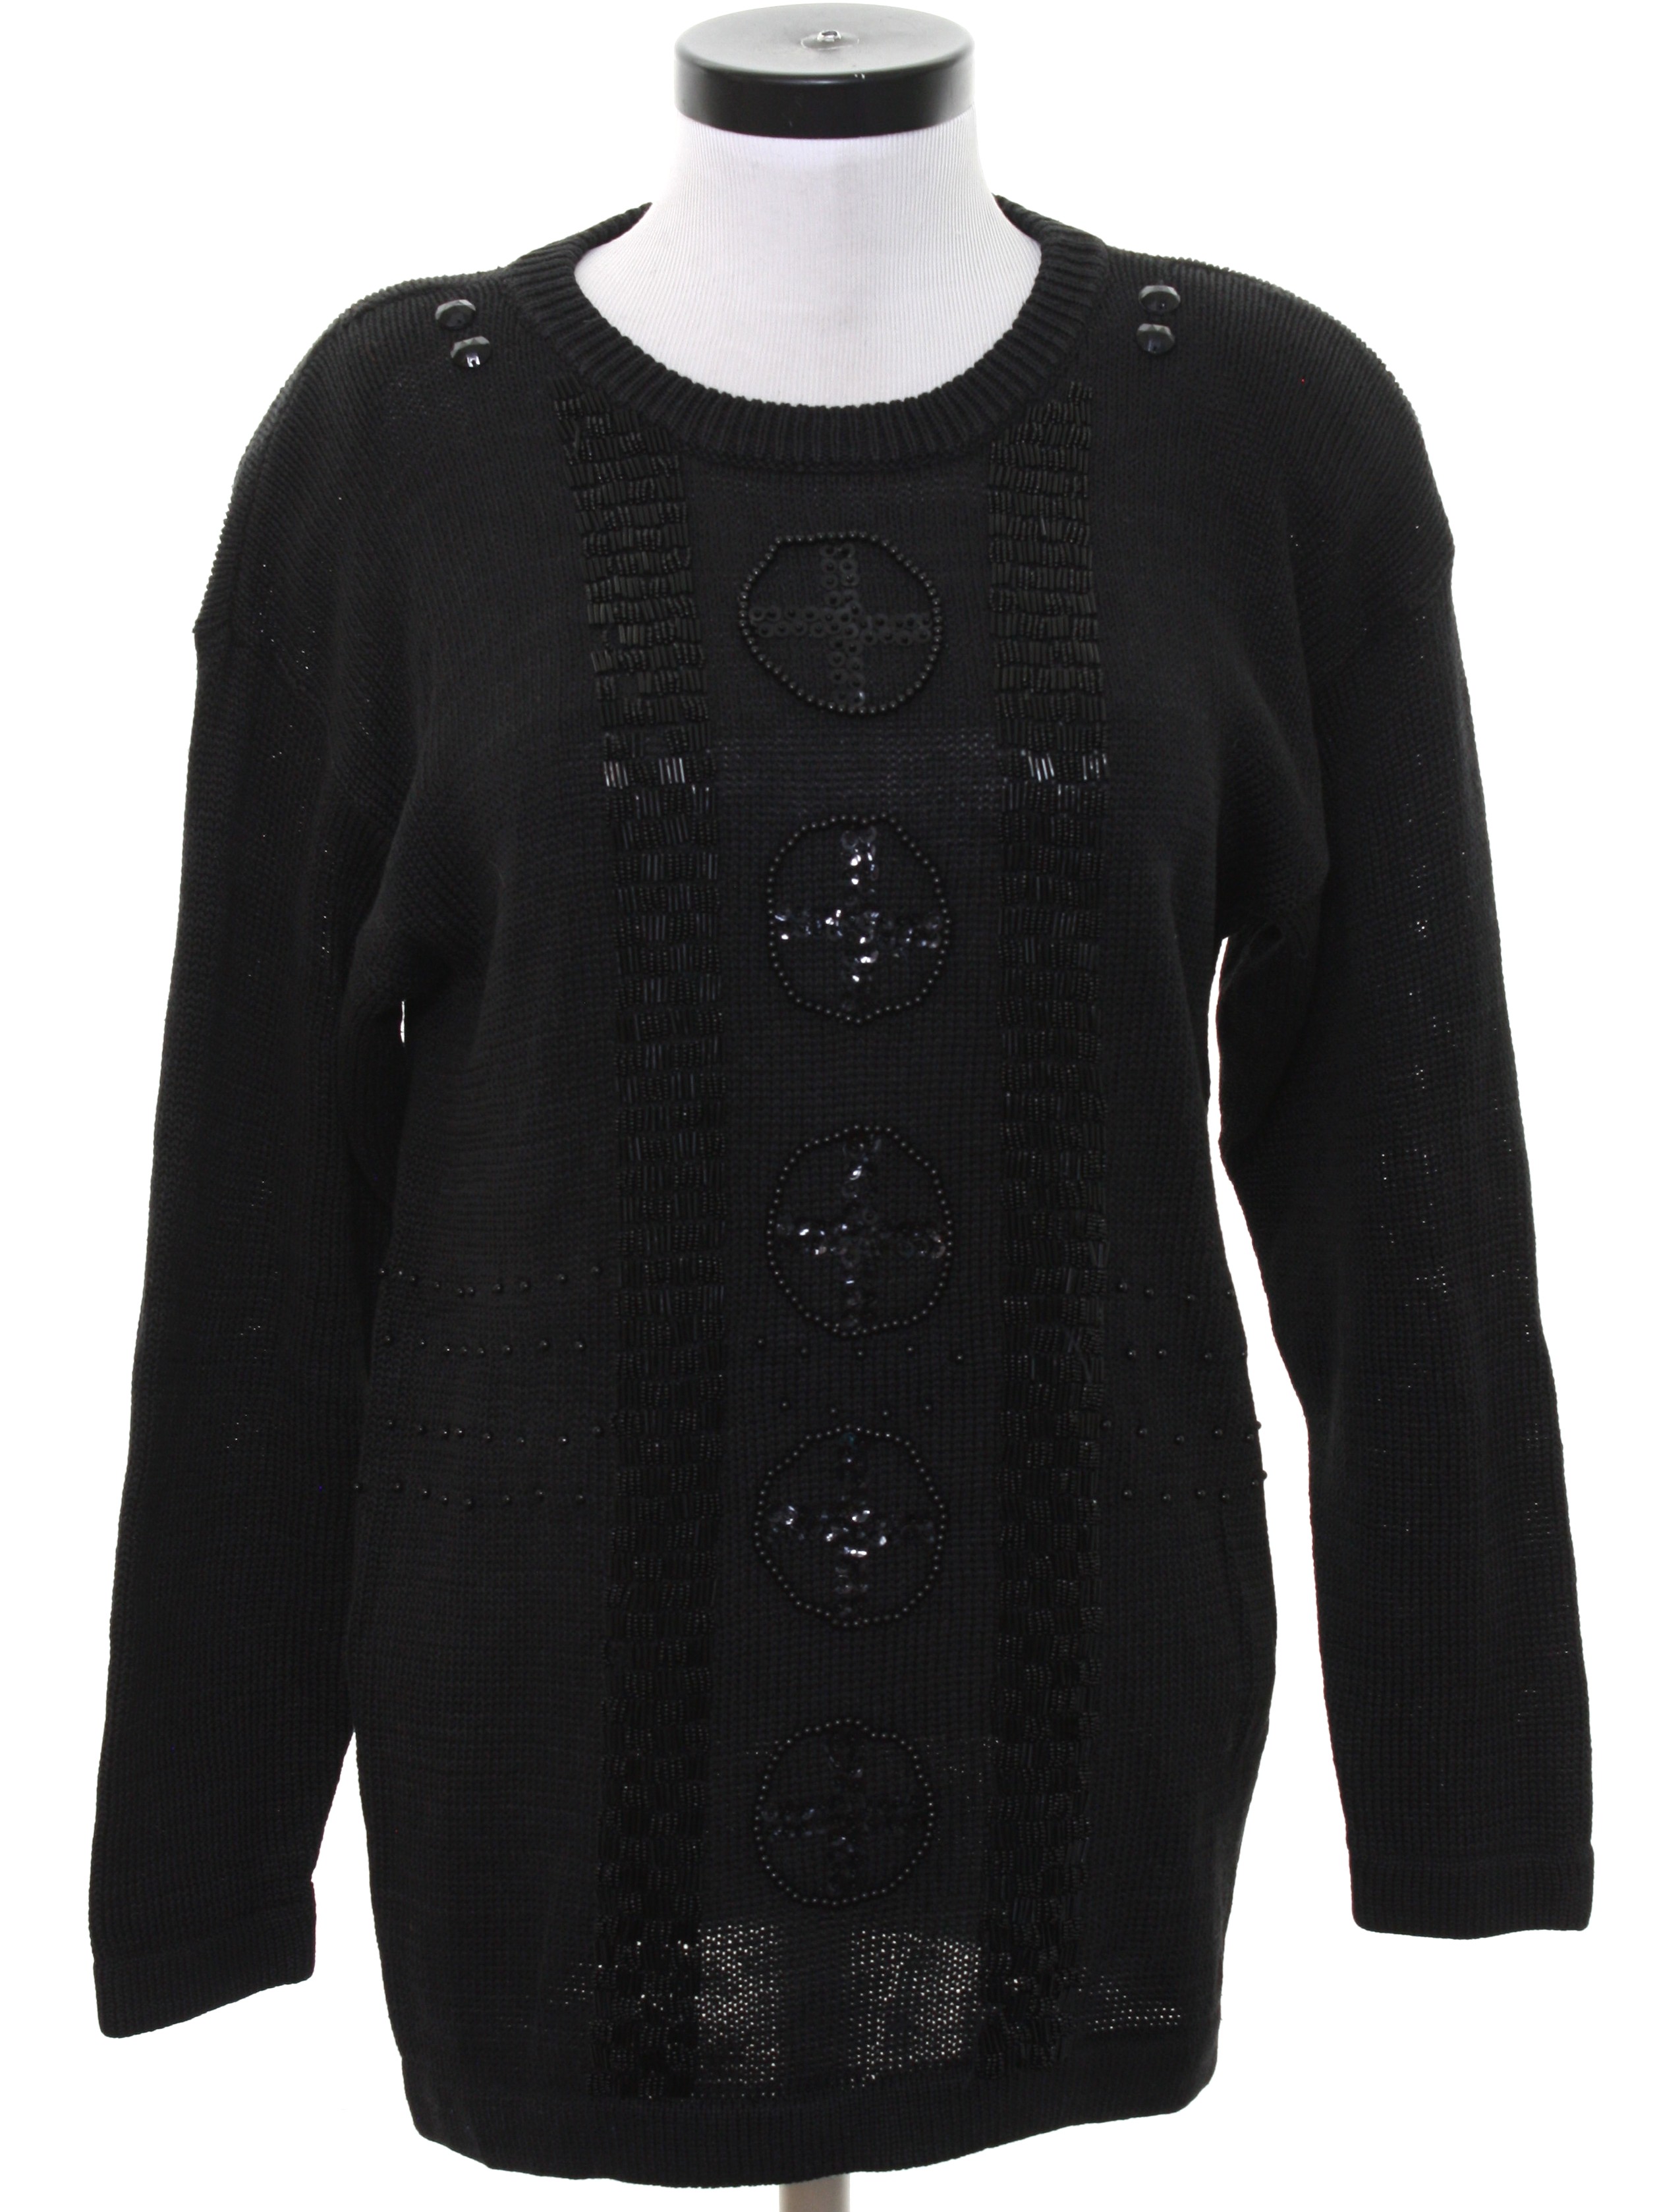 Vintage 80s Beaded Sweater: 80s -No Label- Womens black background ...